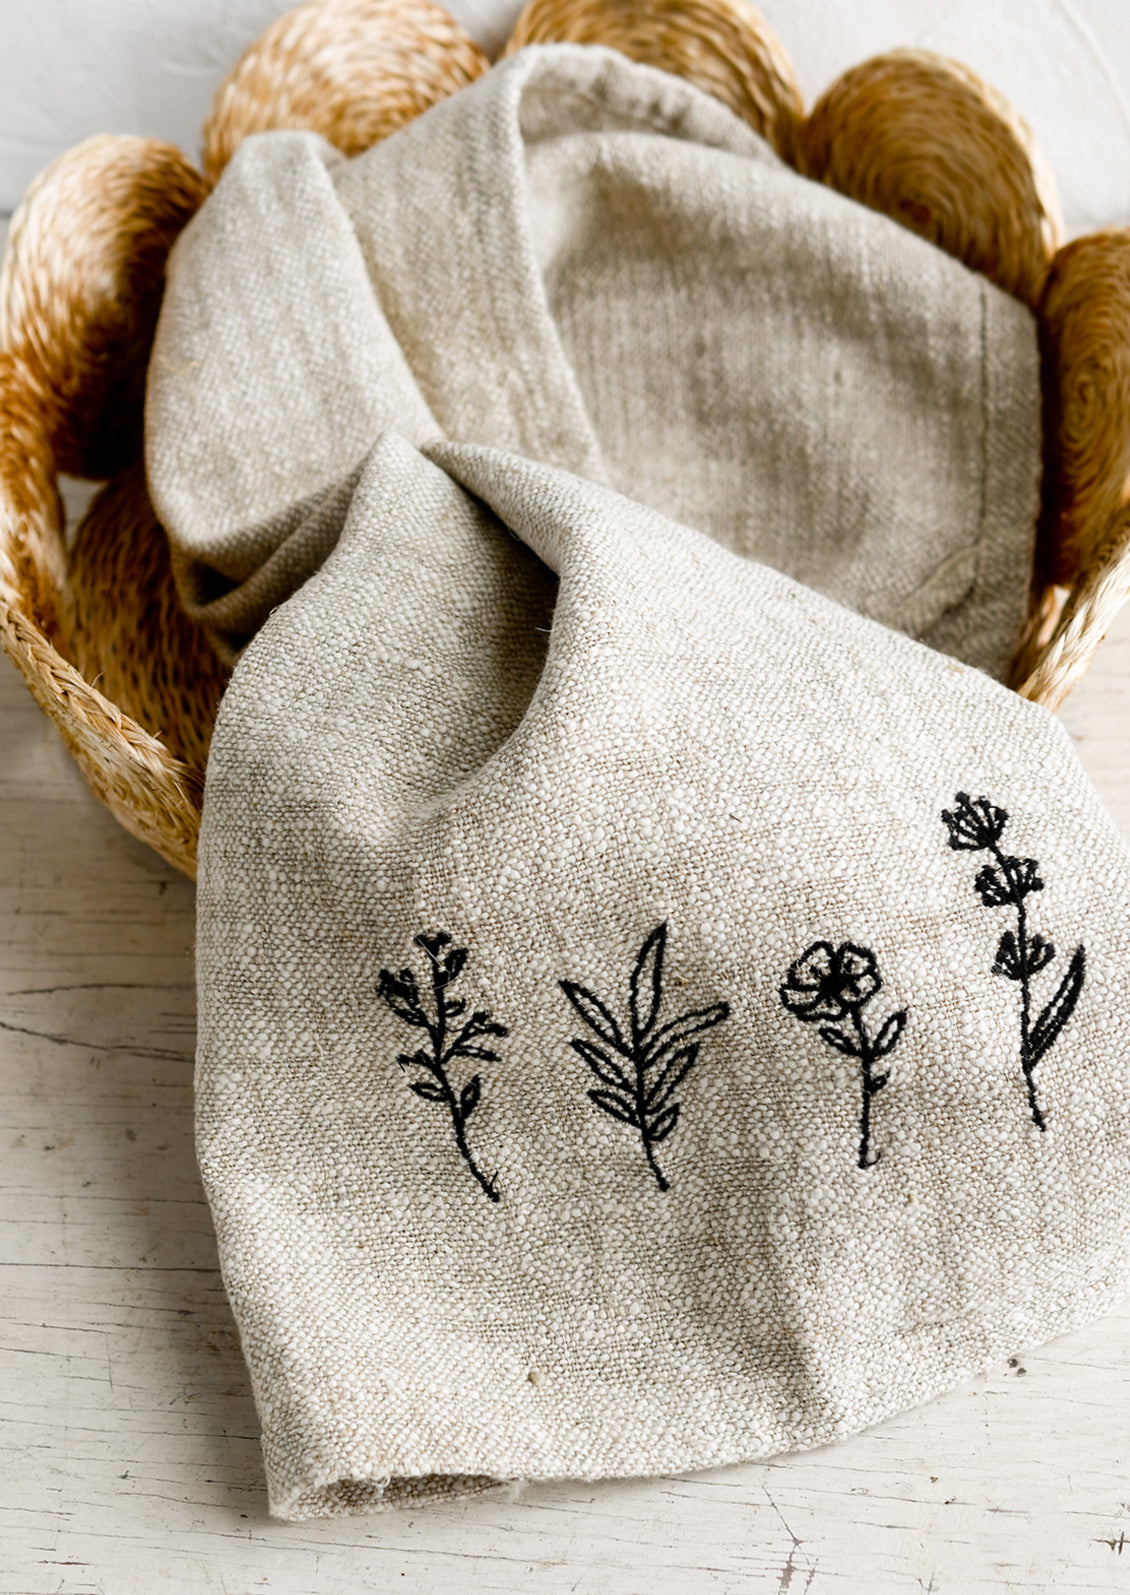 A natural linen tea towel embroidered with flowers in black stitching.